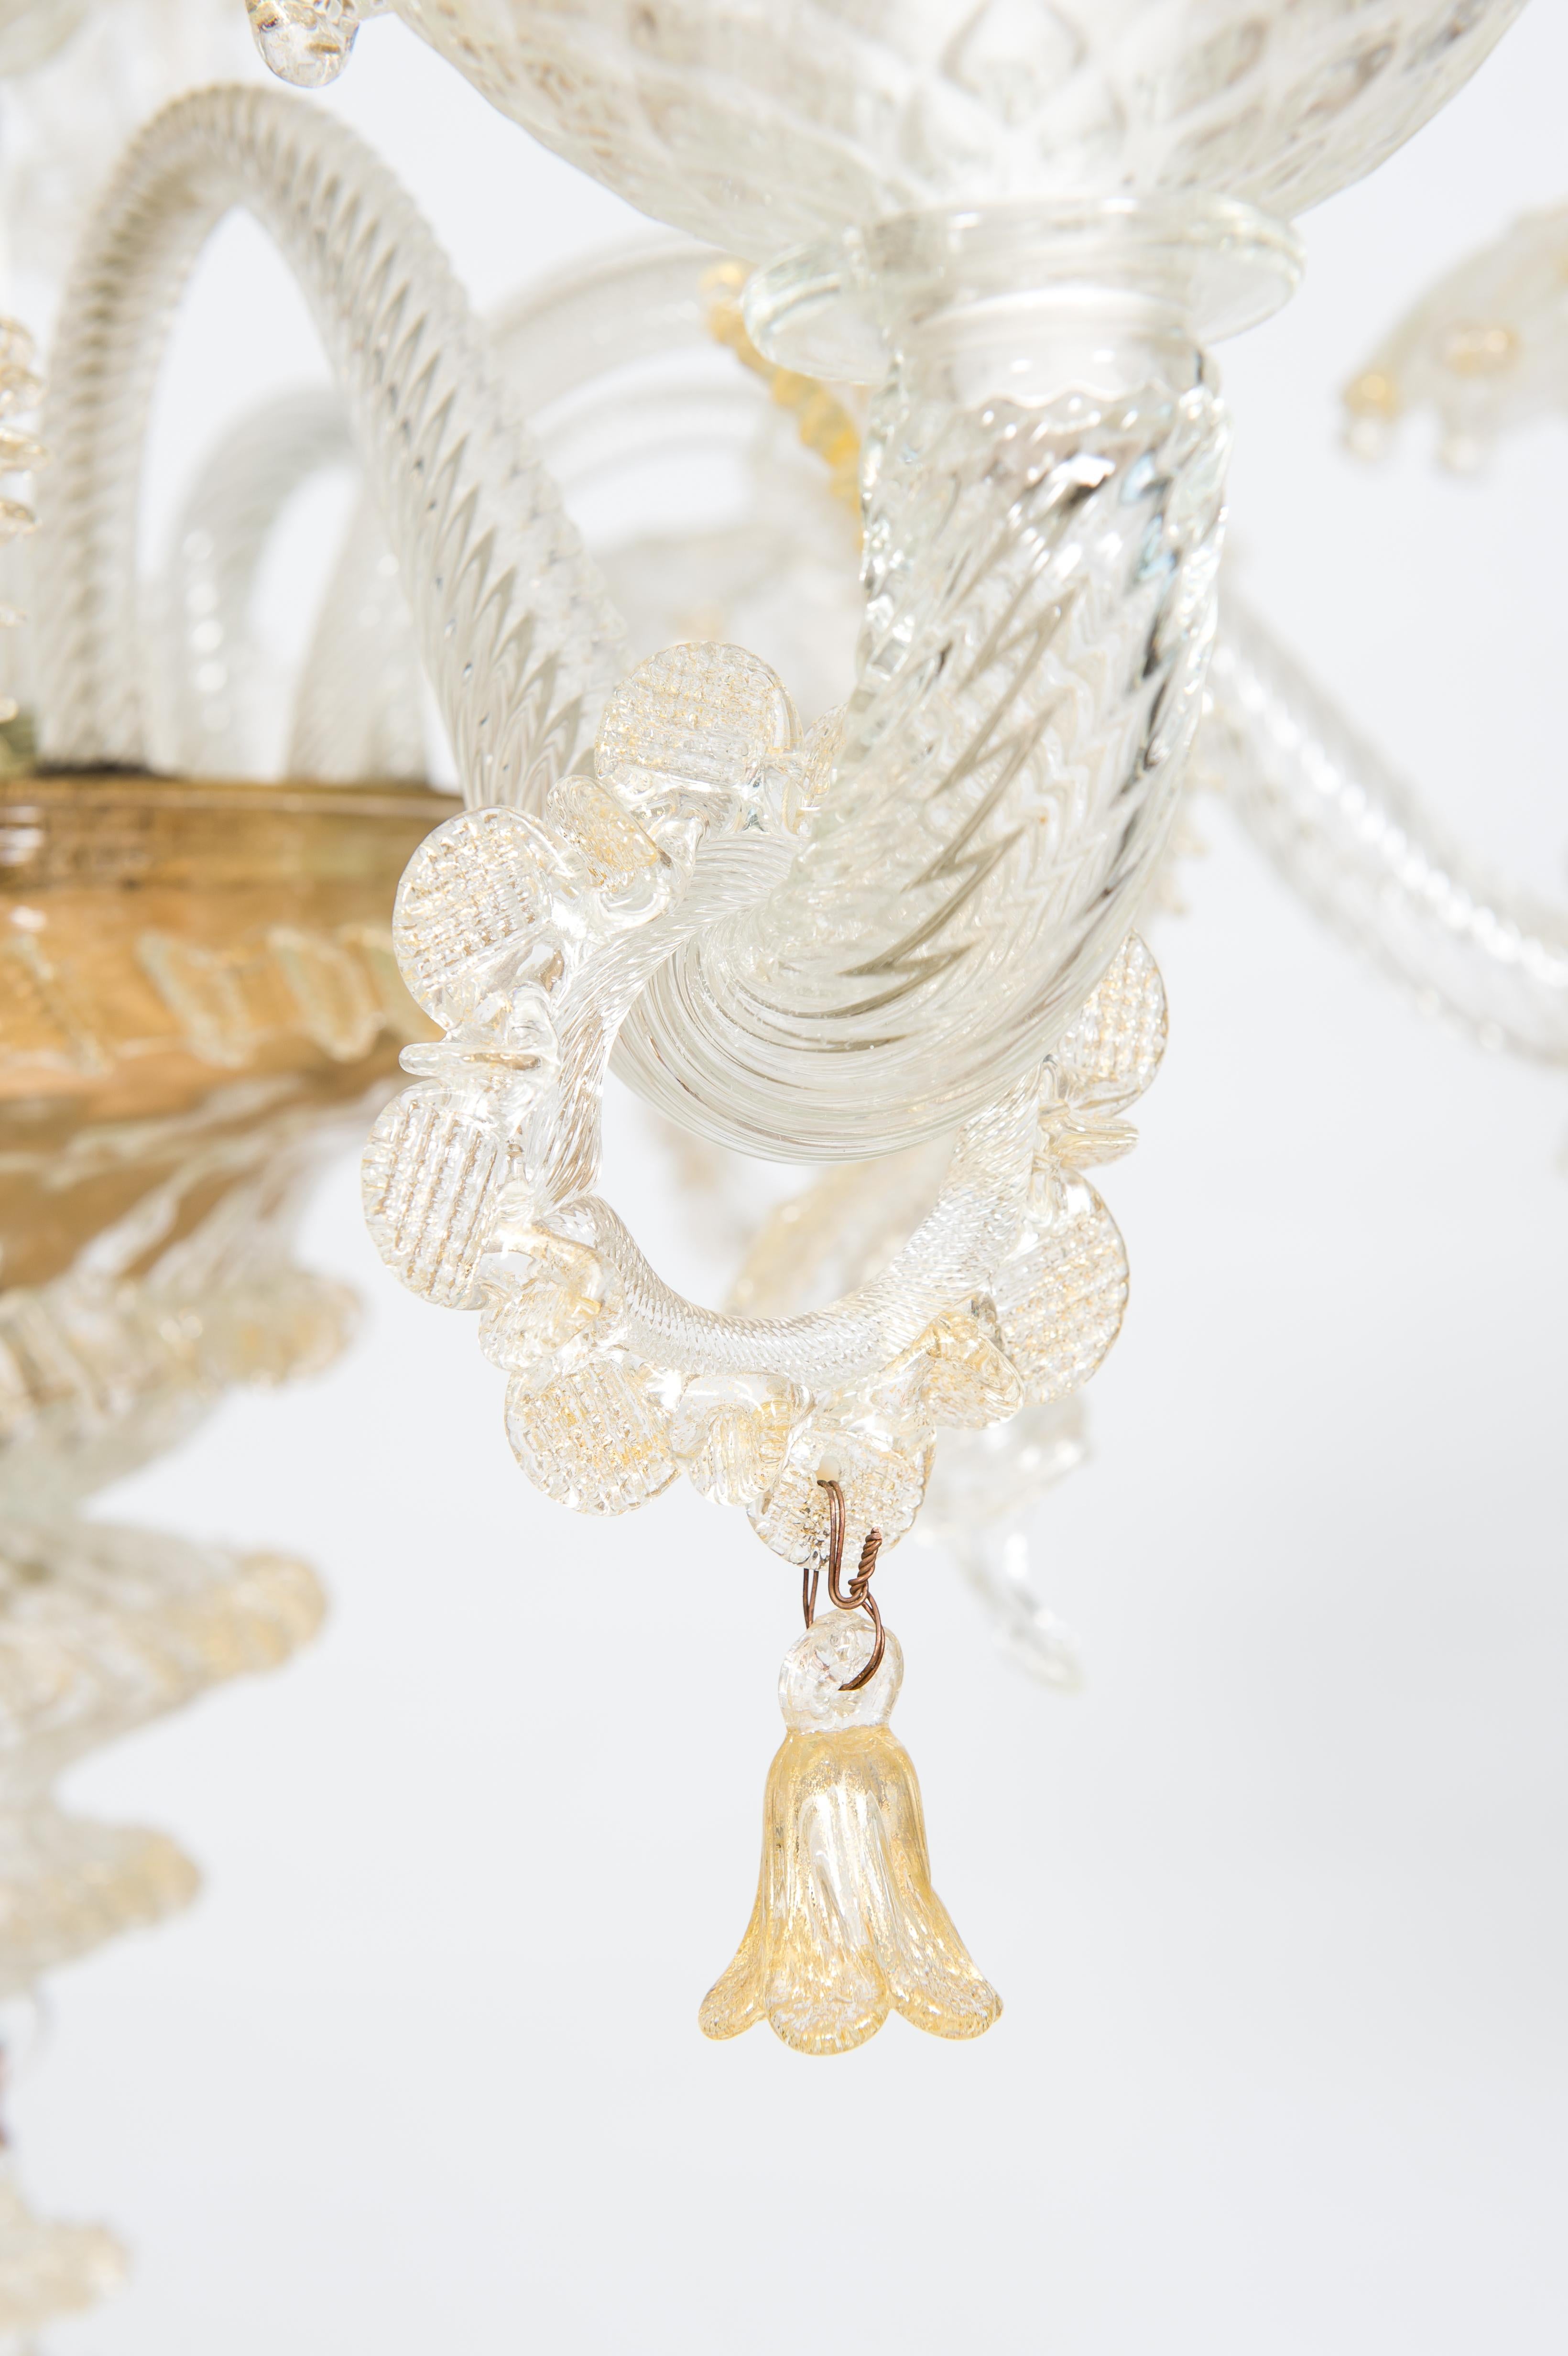 Gold Floral Murano Glass Chandelier with “Riga Dritta” Decorations, 20th Century